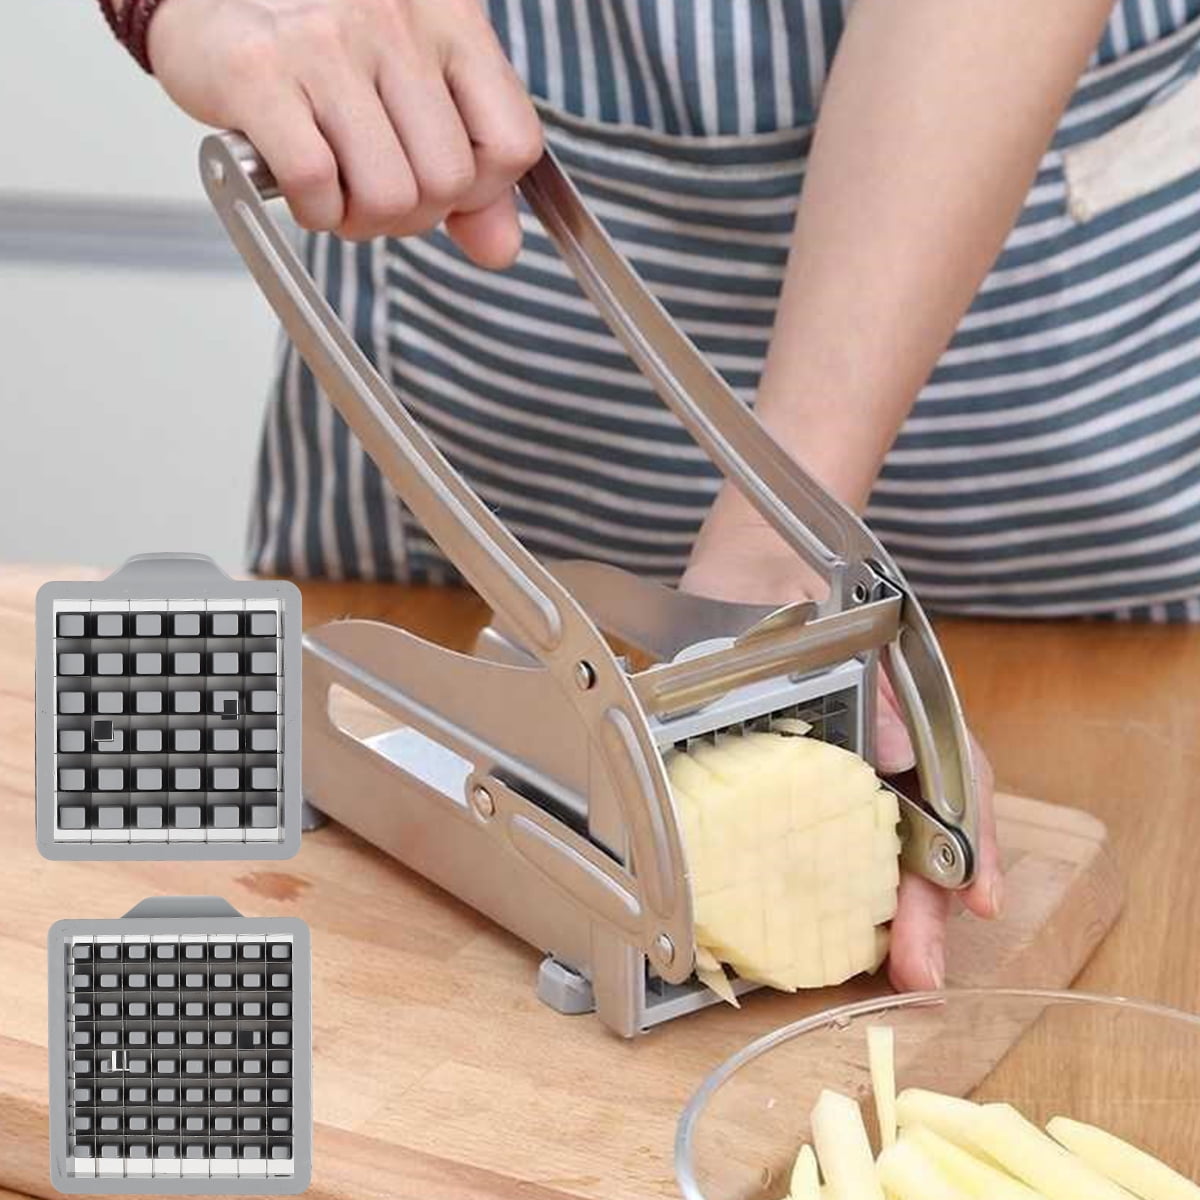 Fichiouy 2L Electric Home Use Vegetable Slicer Fruit Maker Machine Cheese  Potato Grater